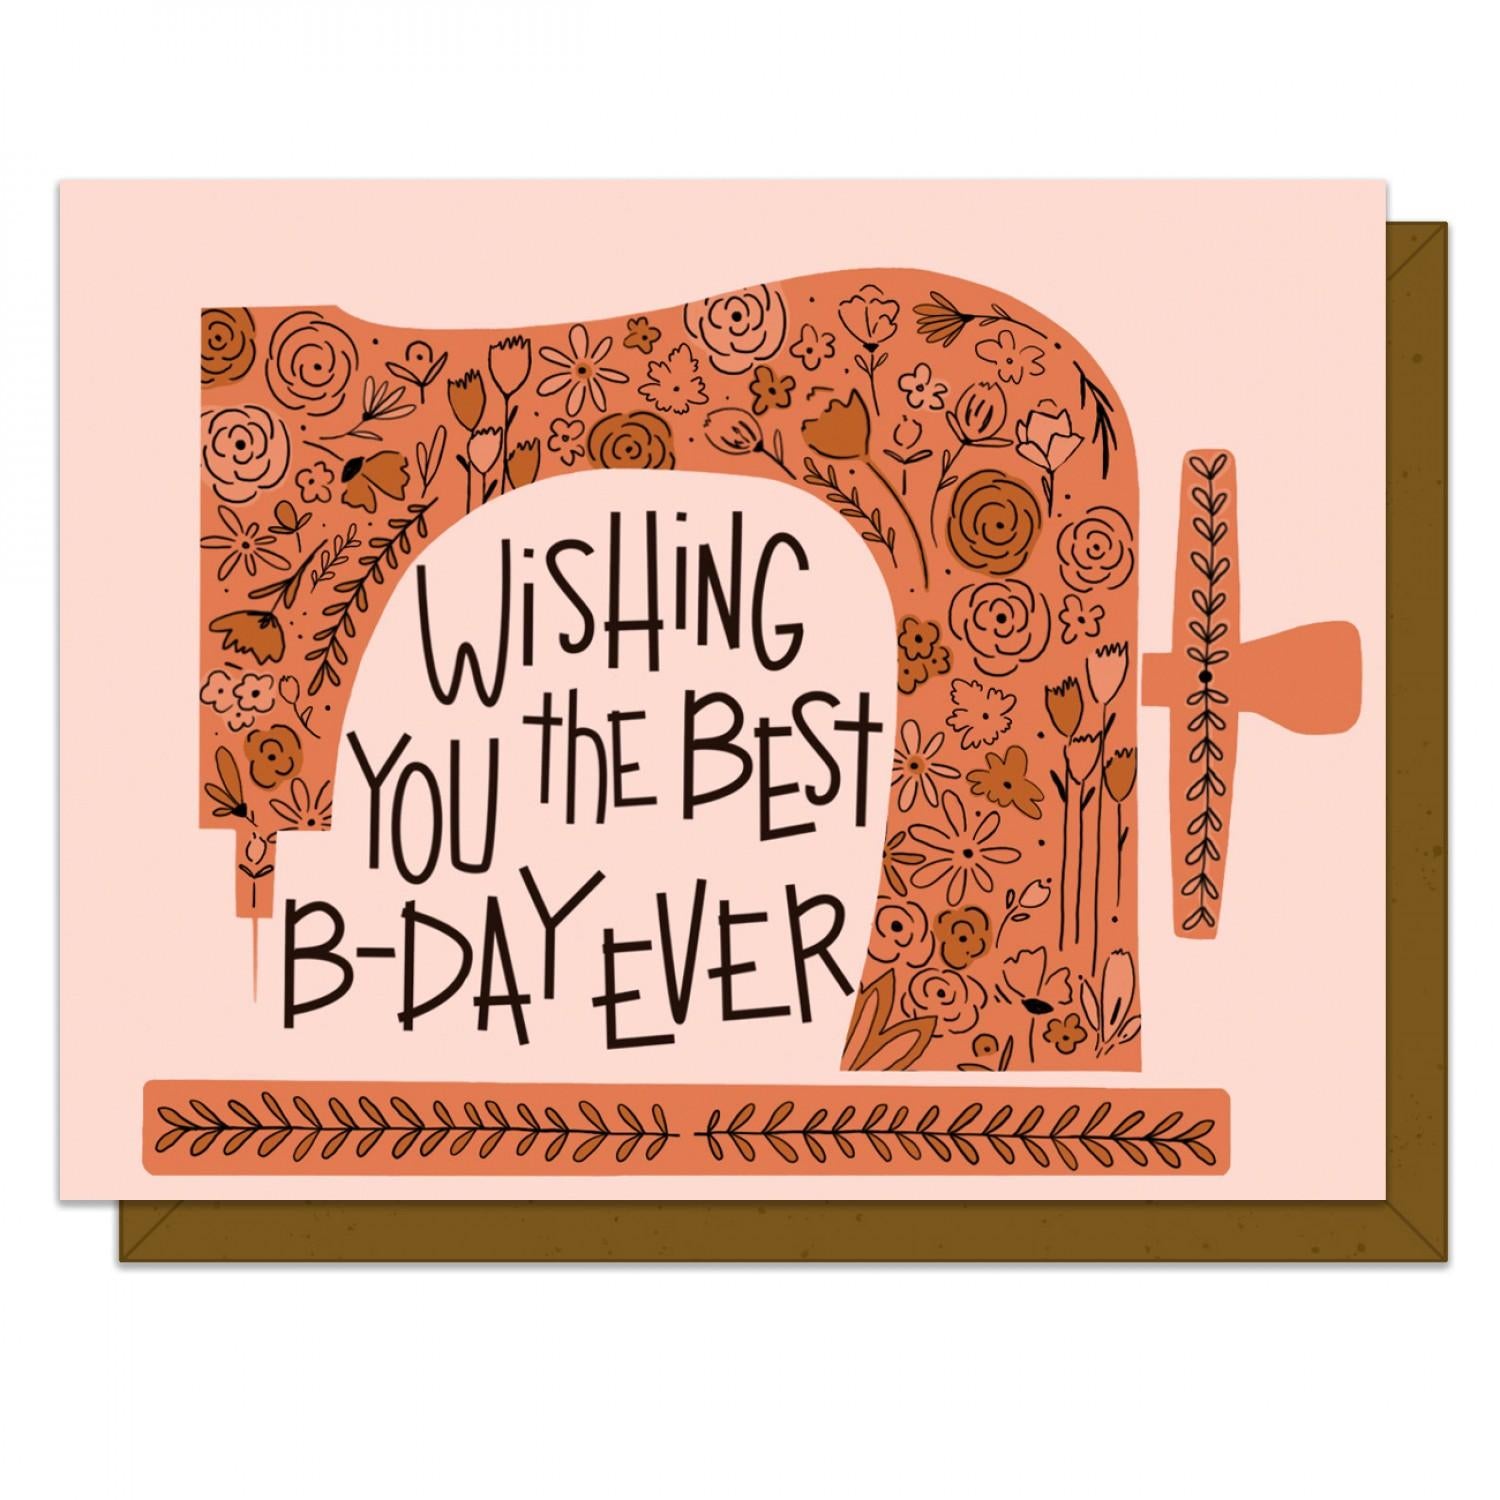 Wishing Best B Day Ever Card